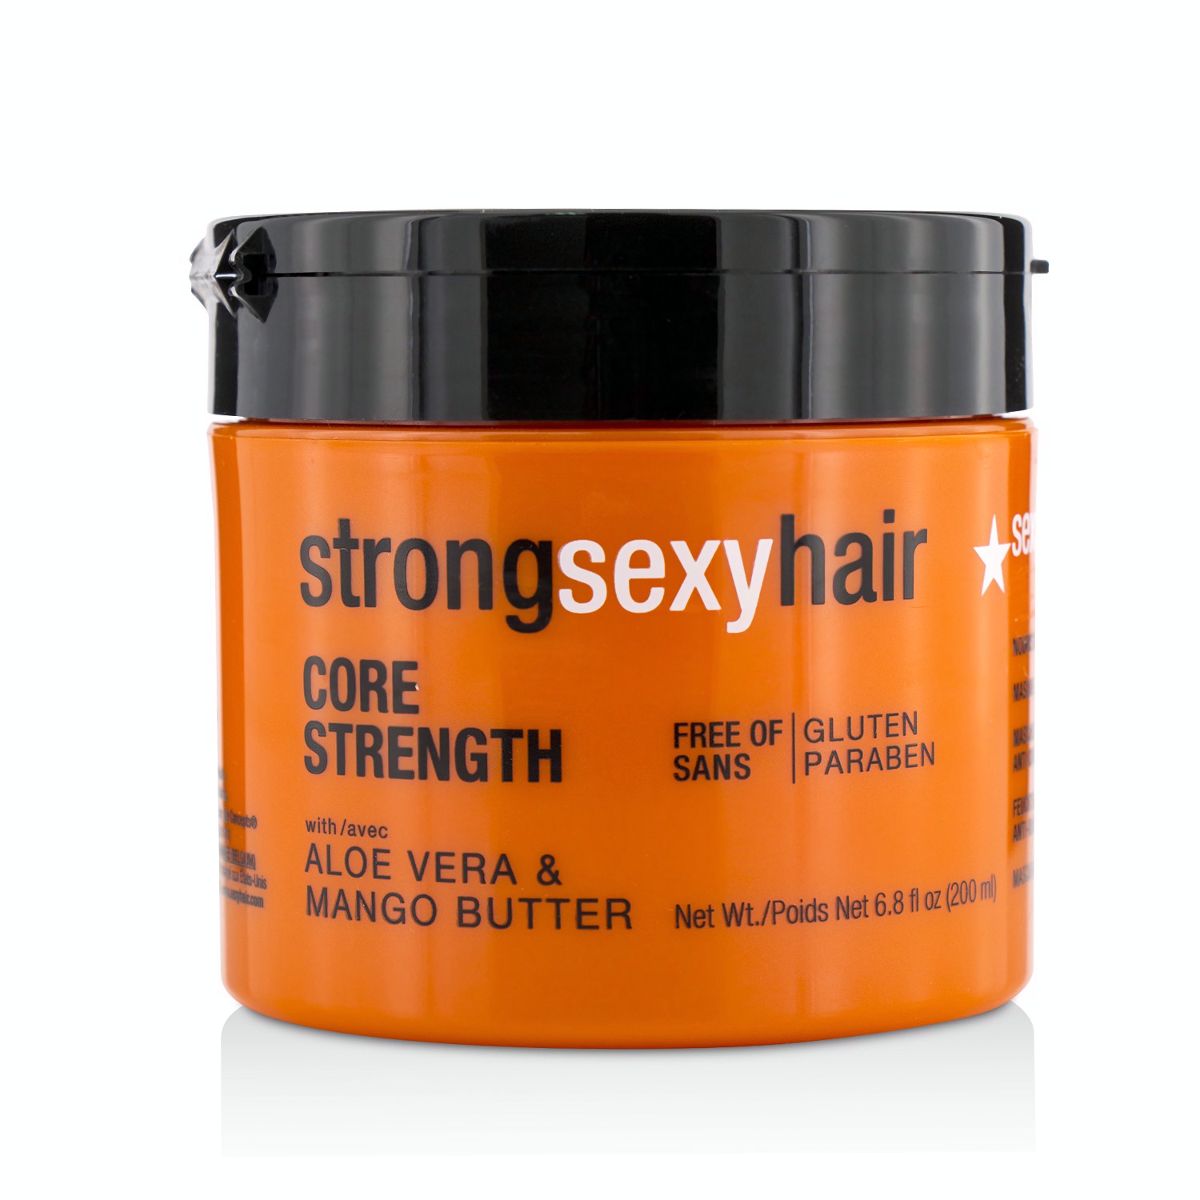 Strong Sexy Hair Core Strength Nourishing Anti-Breakage Masque Sexy Hair Concepts Image